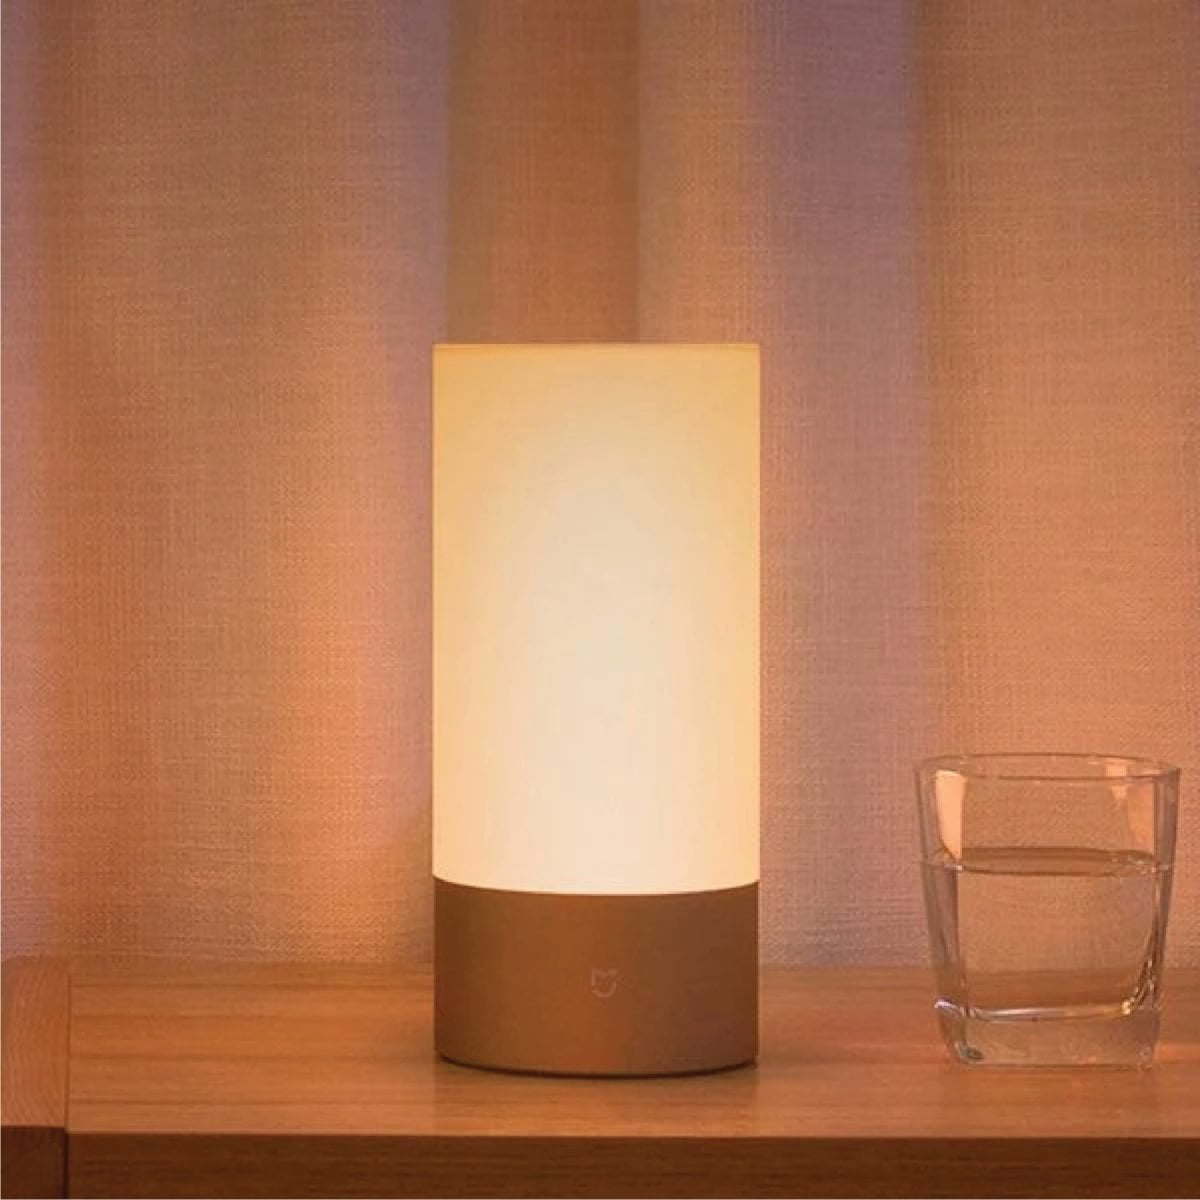 Untitled 2 10 Xiaomi Illuminate Your Home With These Energy-Efficient Bulbs. High Efficient Reflector Provides Excellent Brightness. It Will Suit Your Room Size And Décor. Help Save Energy [Embed]Https://Www.youtube.com/Watch?V=Rkk-Hf64Ihe[/Embed] Mi Bedside Lamp Mi Bedside Lamp (Mjctd01Yl) Led Bluetooth Wifi Control